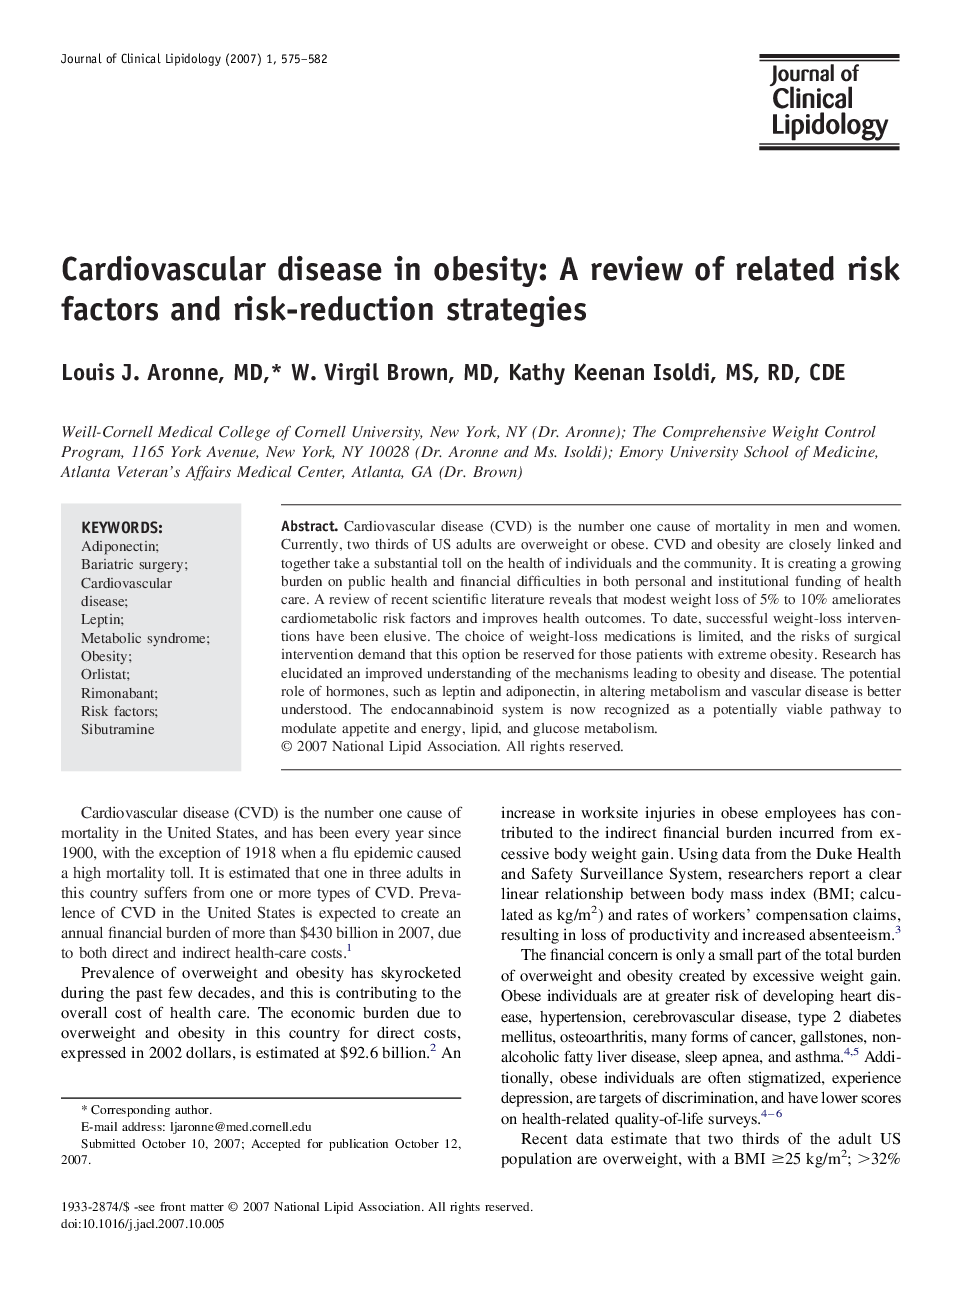 Cardiovascular disease in obesity: A review of related risk factors and risk-reduction strategies